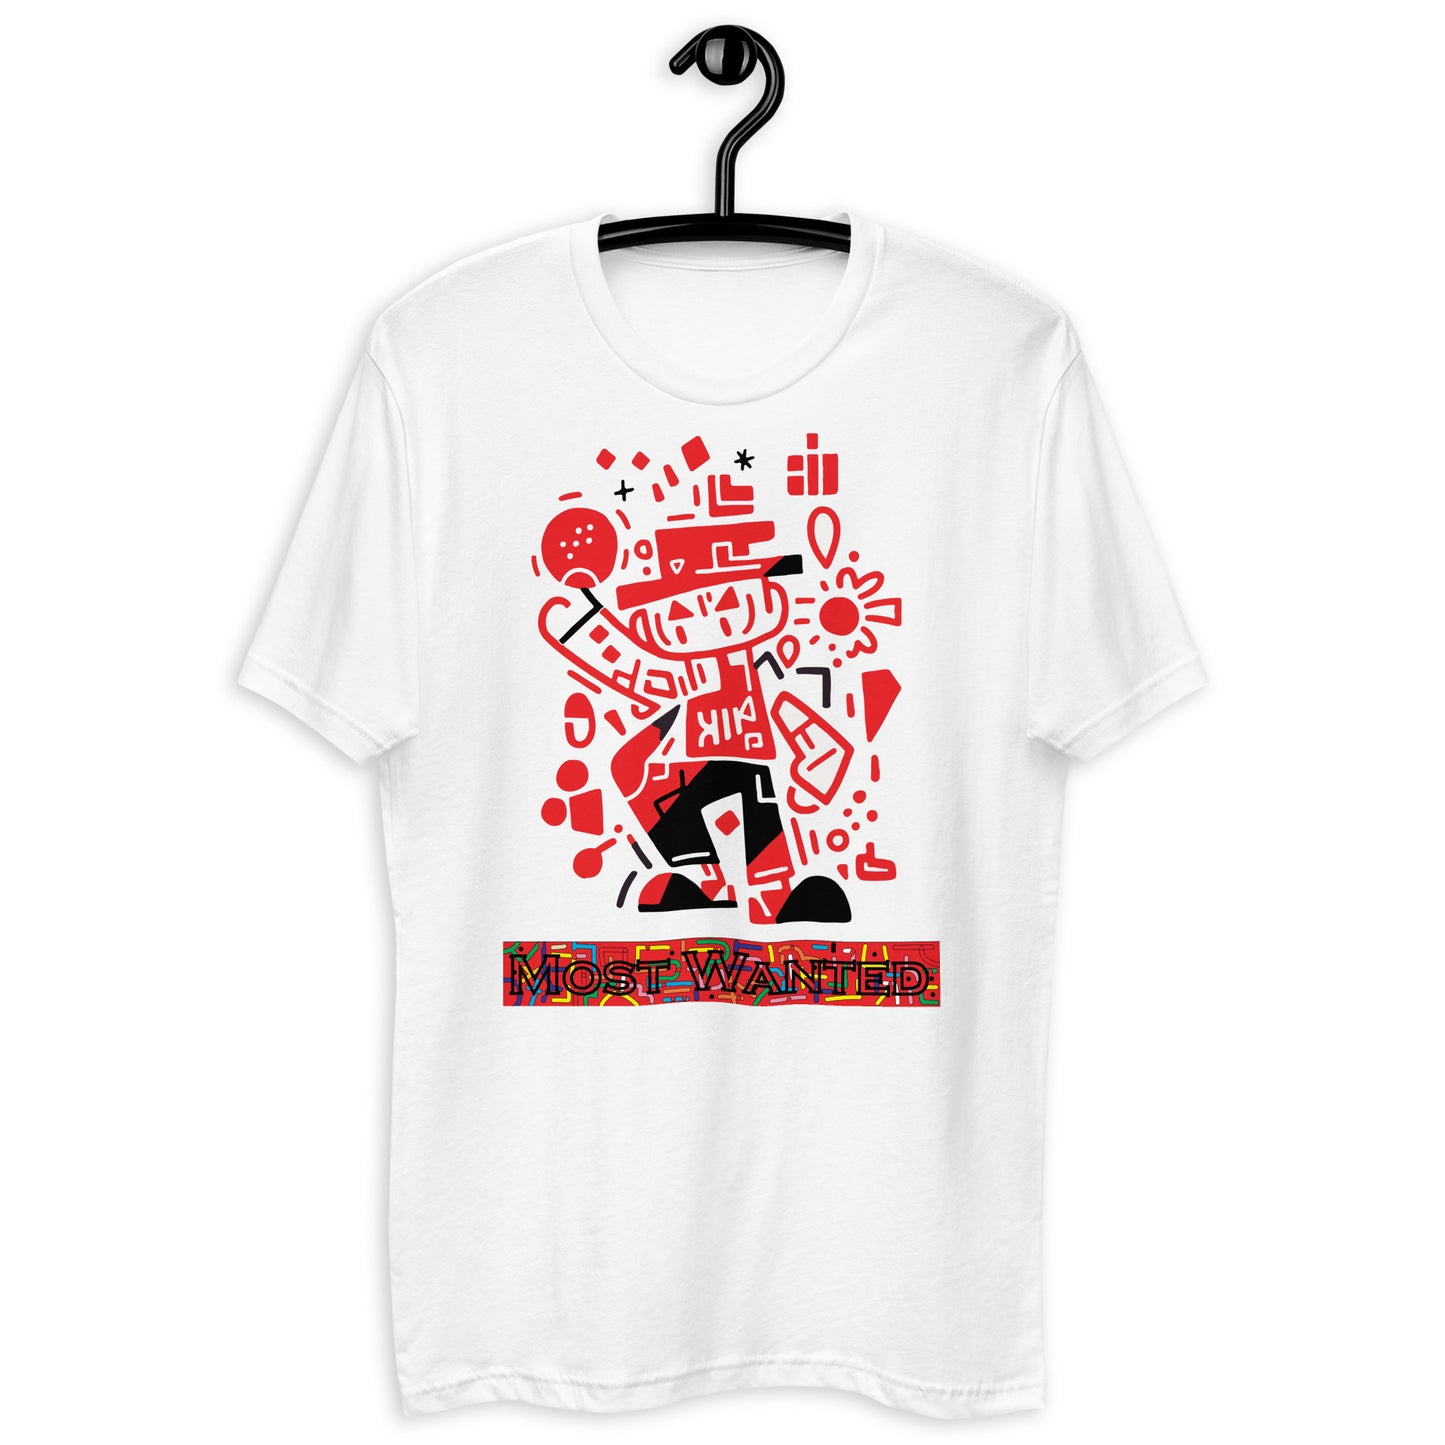 Doodles Me "Most Wanted" T-shirt #4